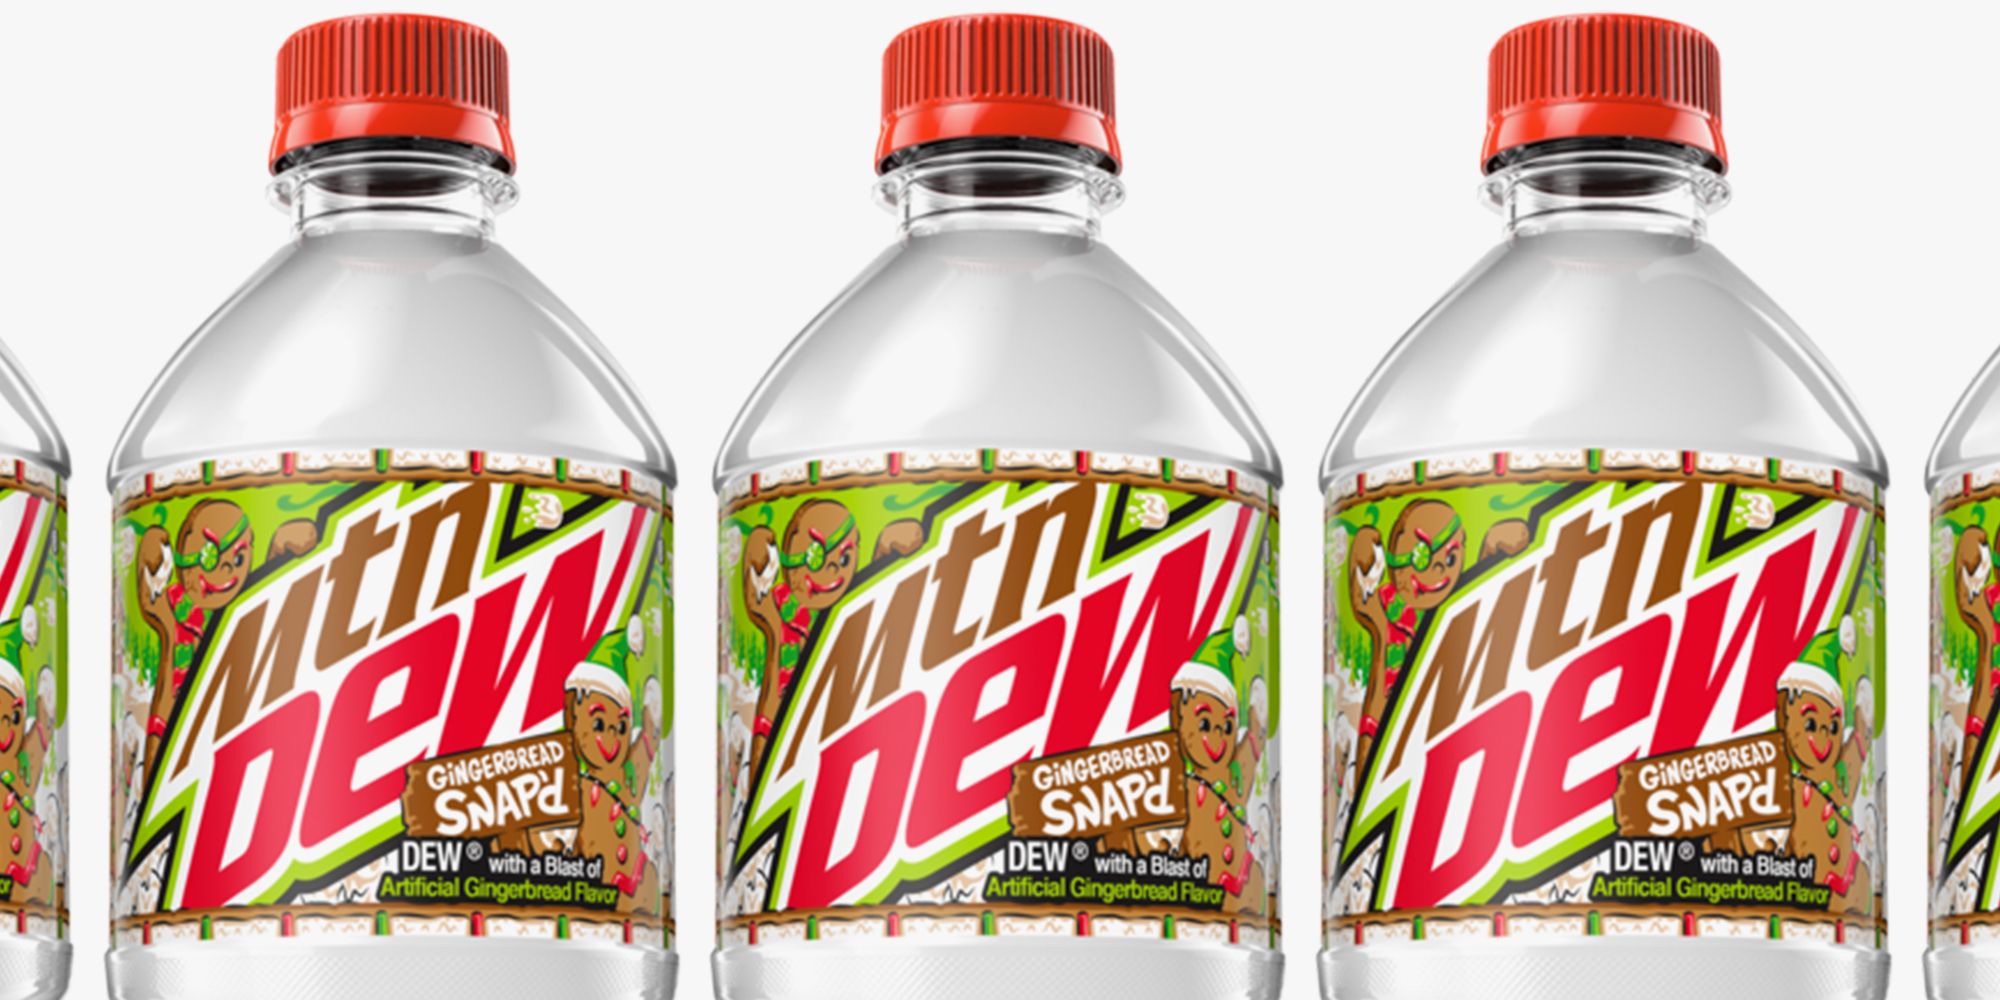 ⭐ 2021 Mountain Mtn Dew Gingerbread Snap'd 12 pack of 12oz cans *FREE SHIP 